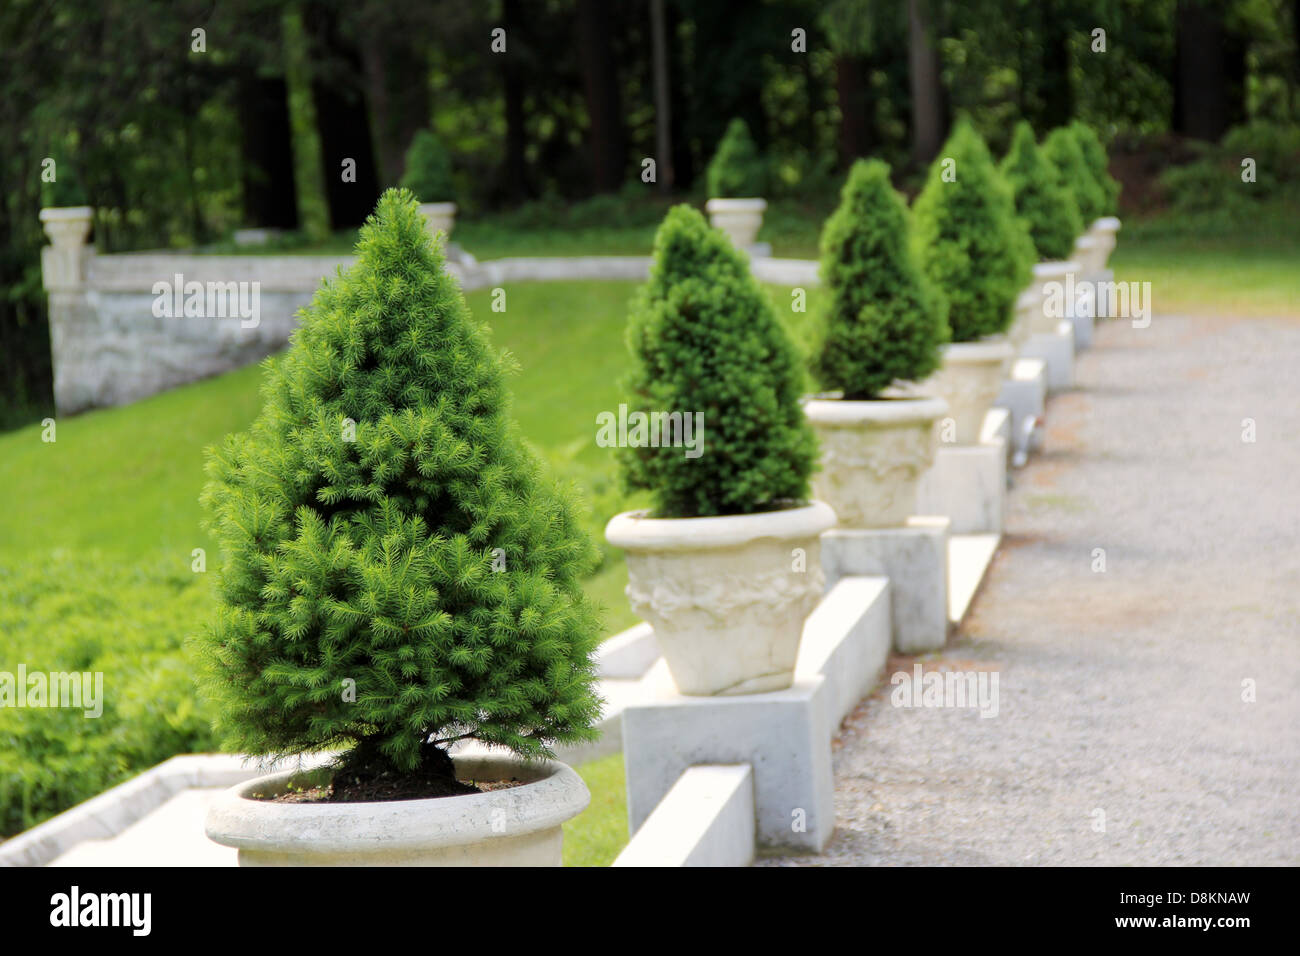 Gravel pathway with several dwarf pine trees in marble planters lined up neatly along manicured lawns and garden. Stock Photo